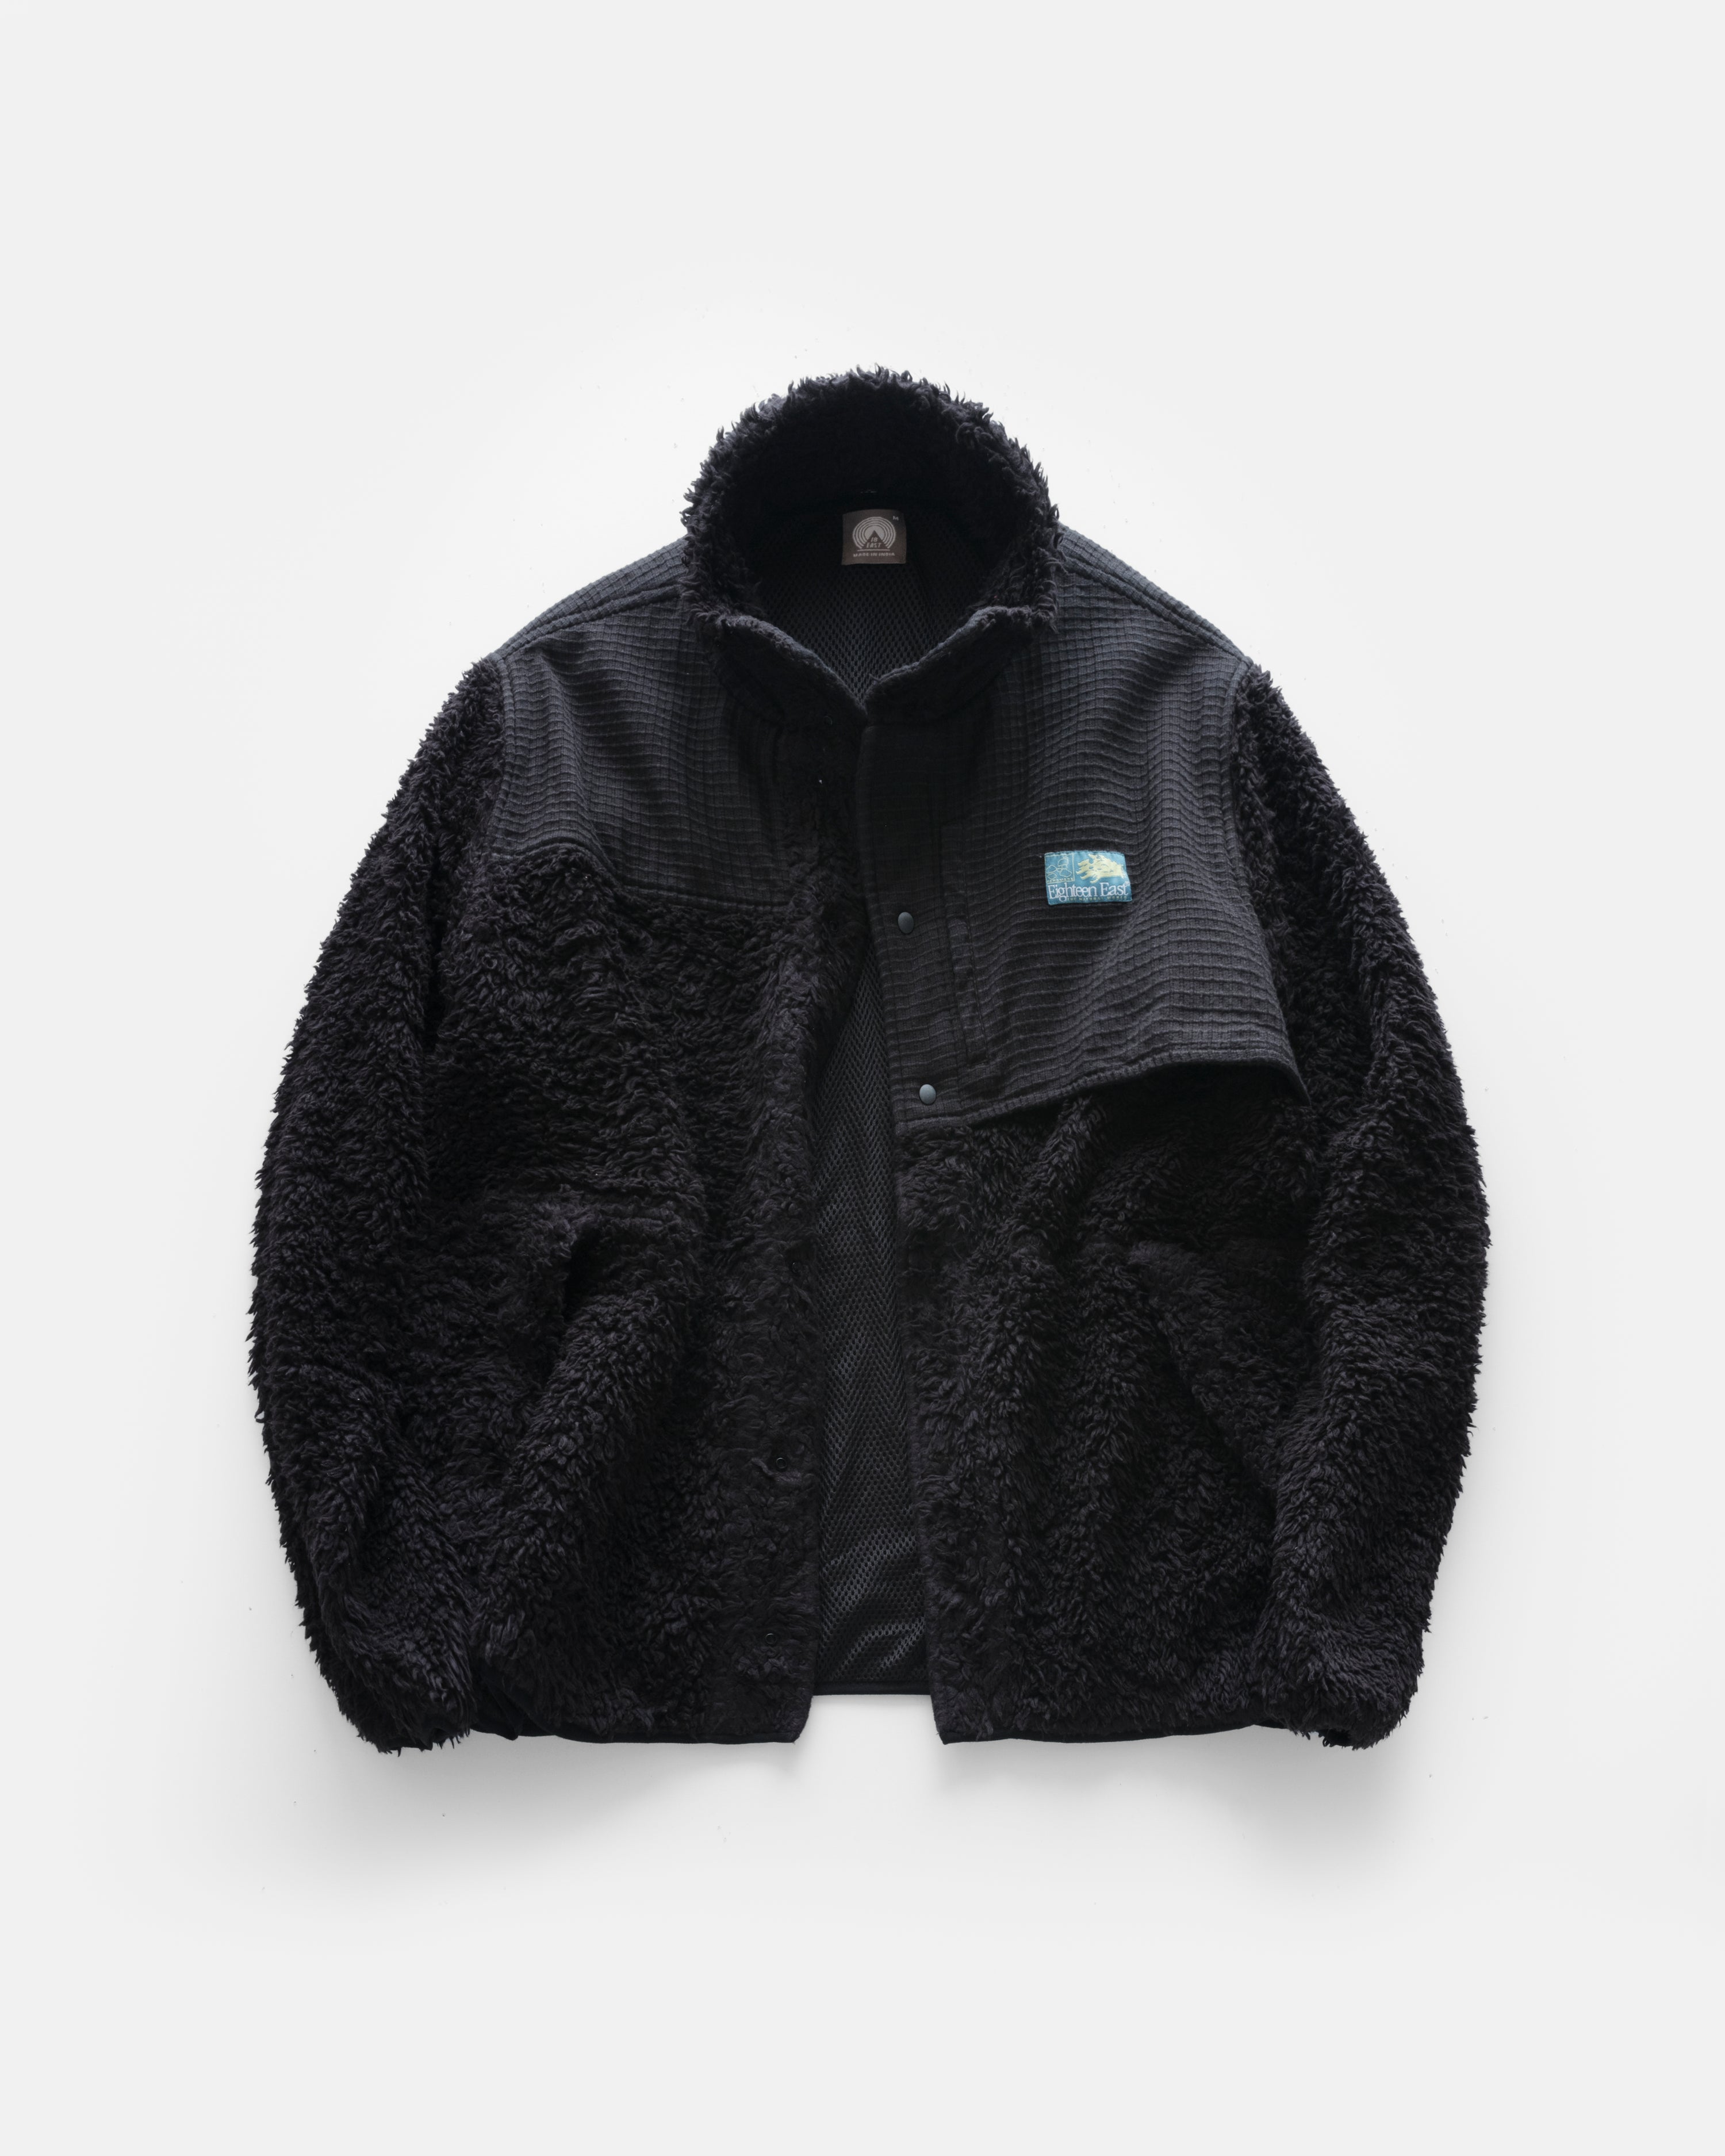 LOOP RD SNAP FRONT JACKET - BLACK DEEP PILE ORGANIC COTTON FLEECE / EXPLODED RIPSTOP COTTON